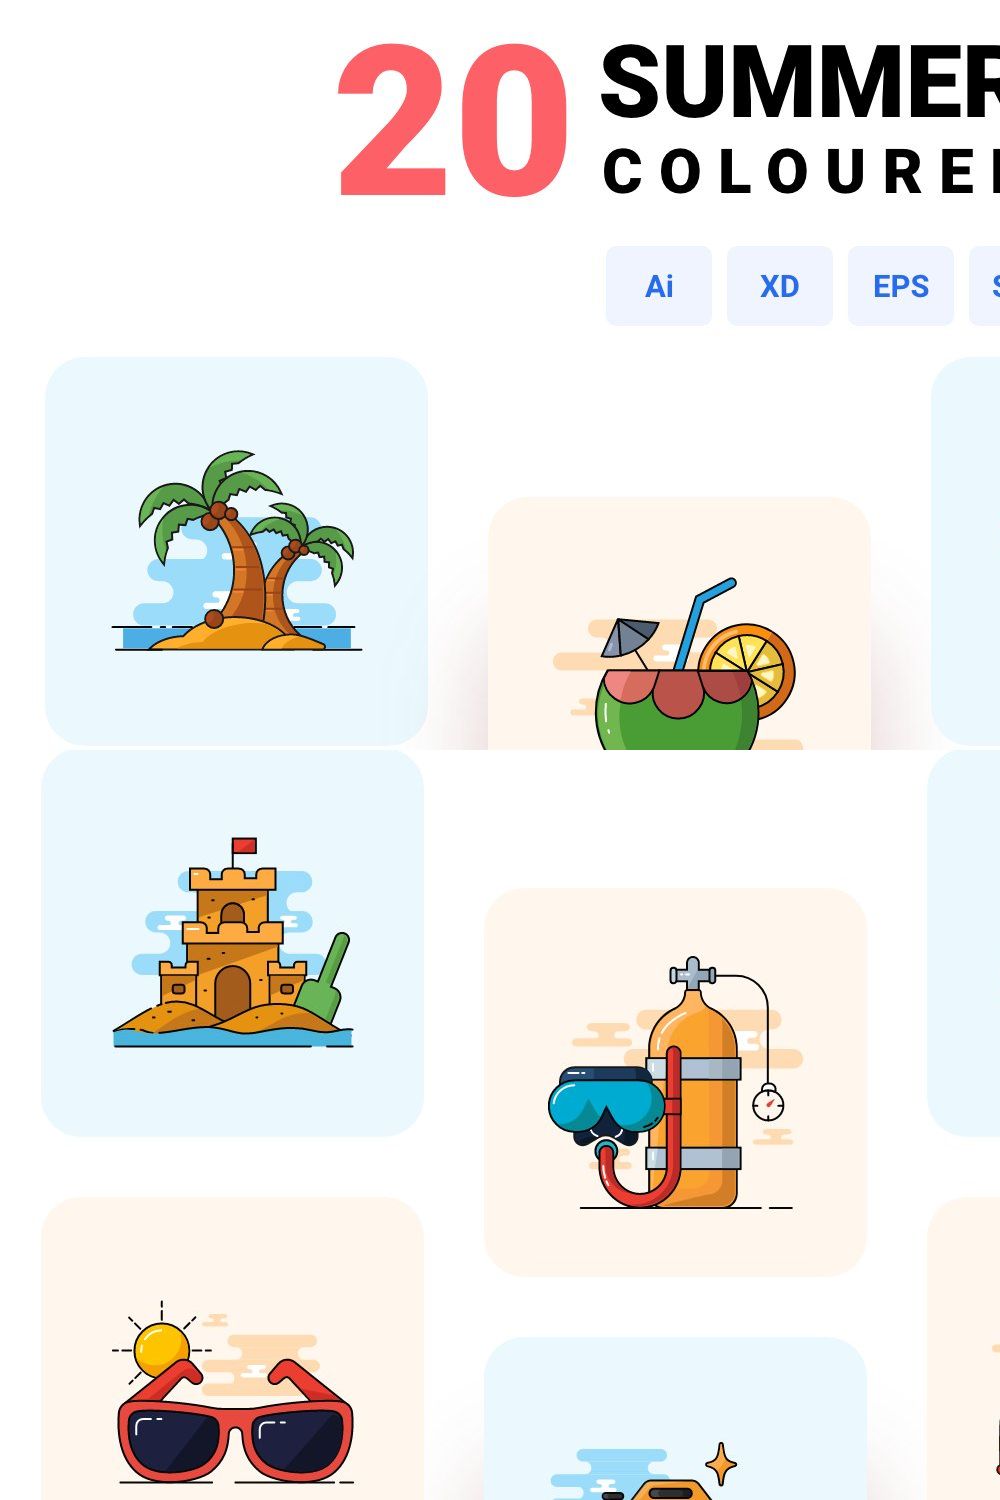 Summer holiday - Coloured icon set pinterest preview image.